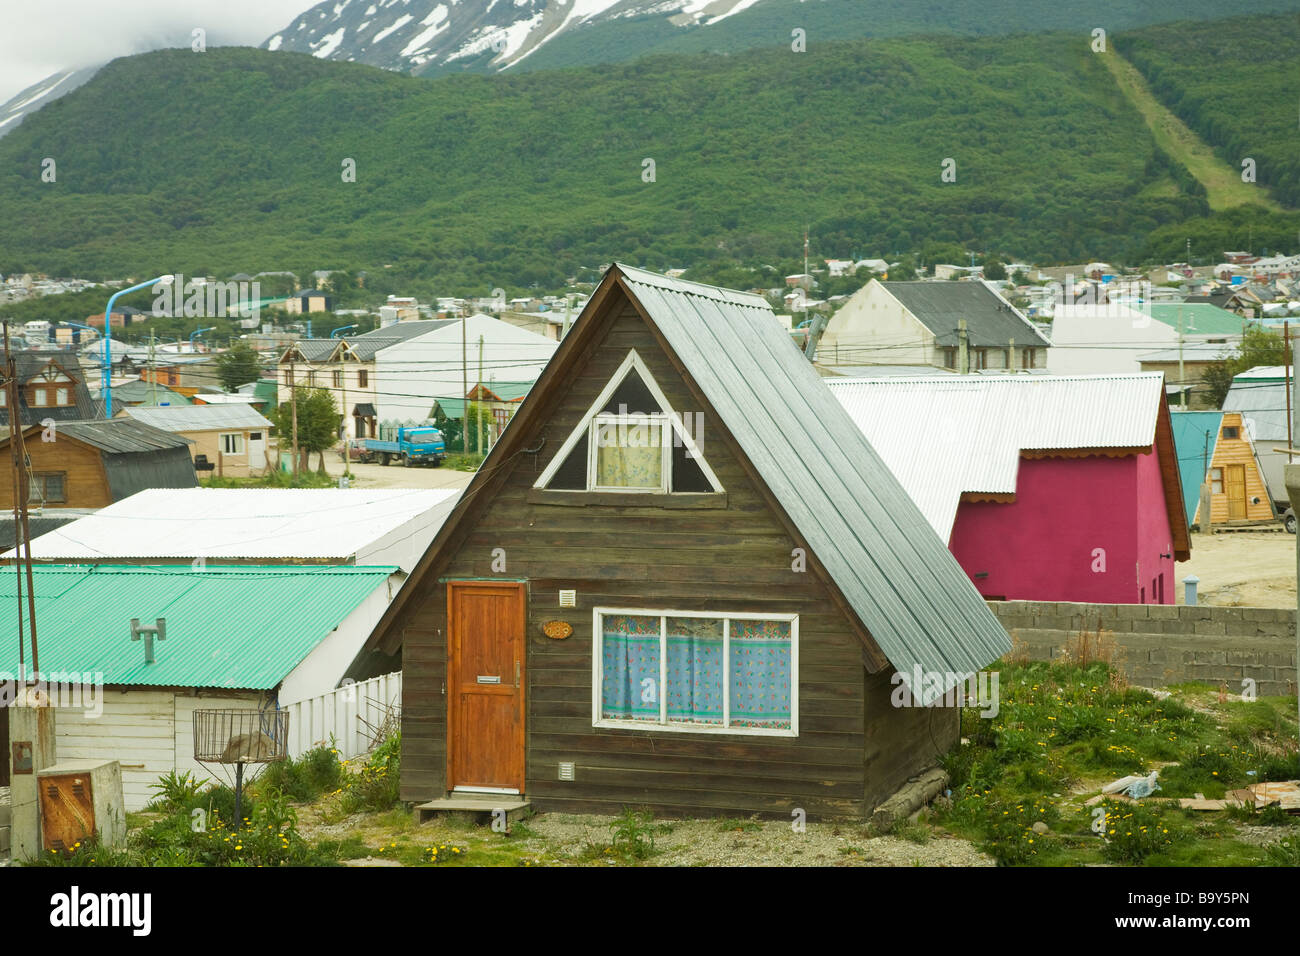 Small traditional wooden houses Ushuaia town Tierra del Fuego Argentina South America Stock Photo